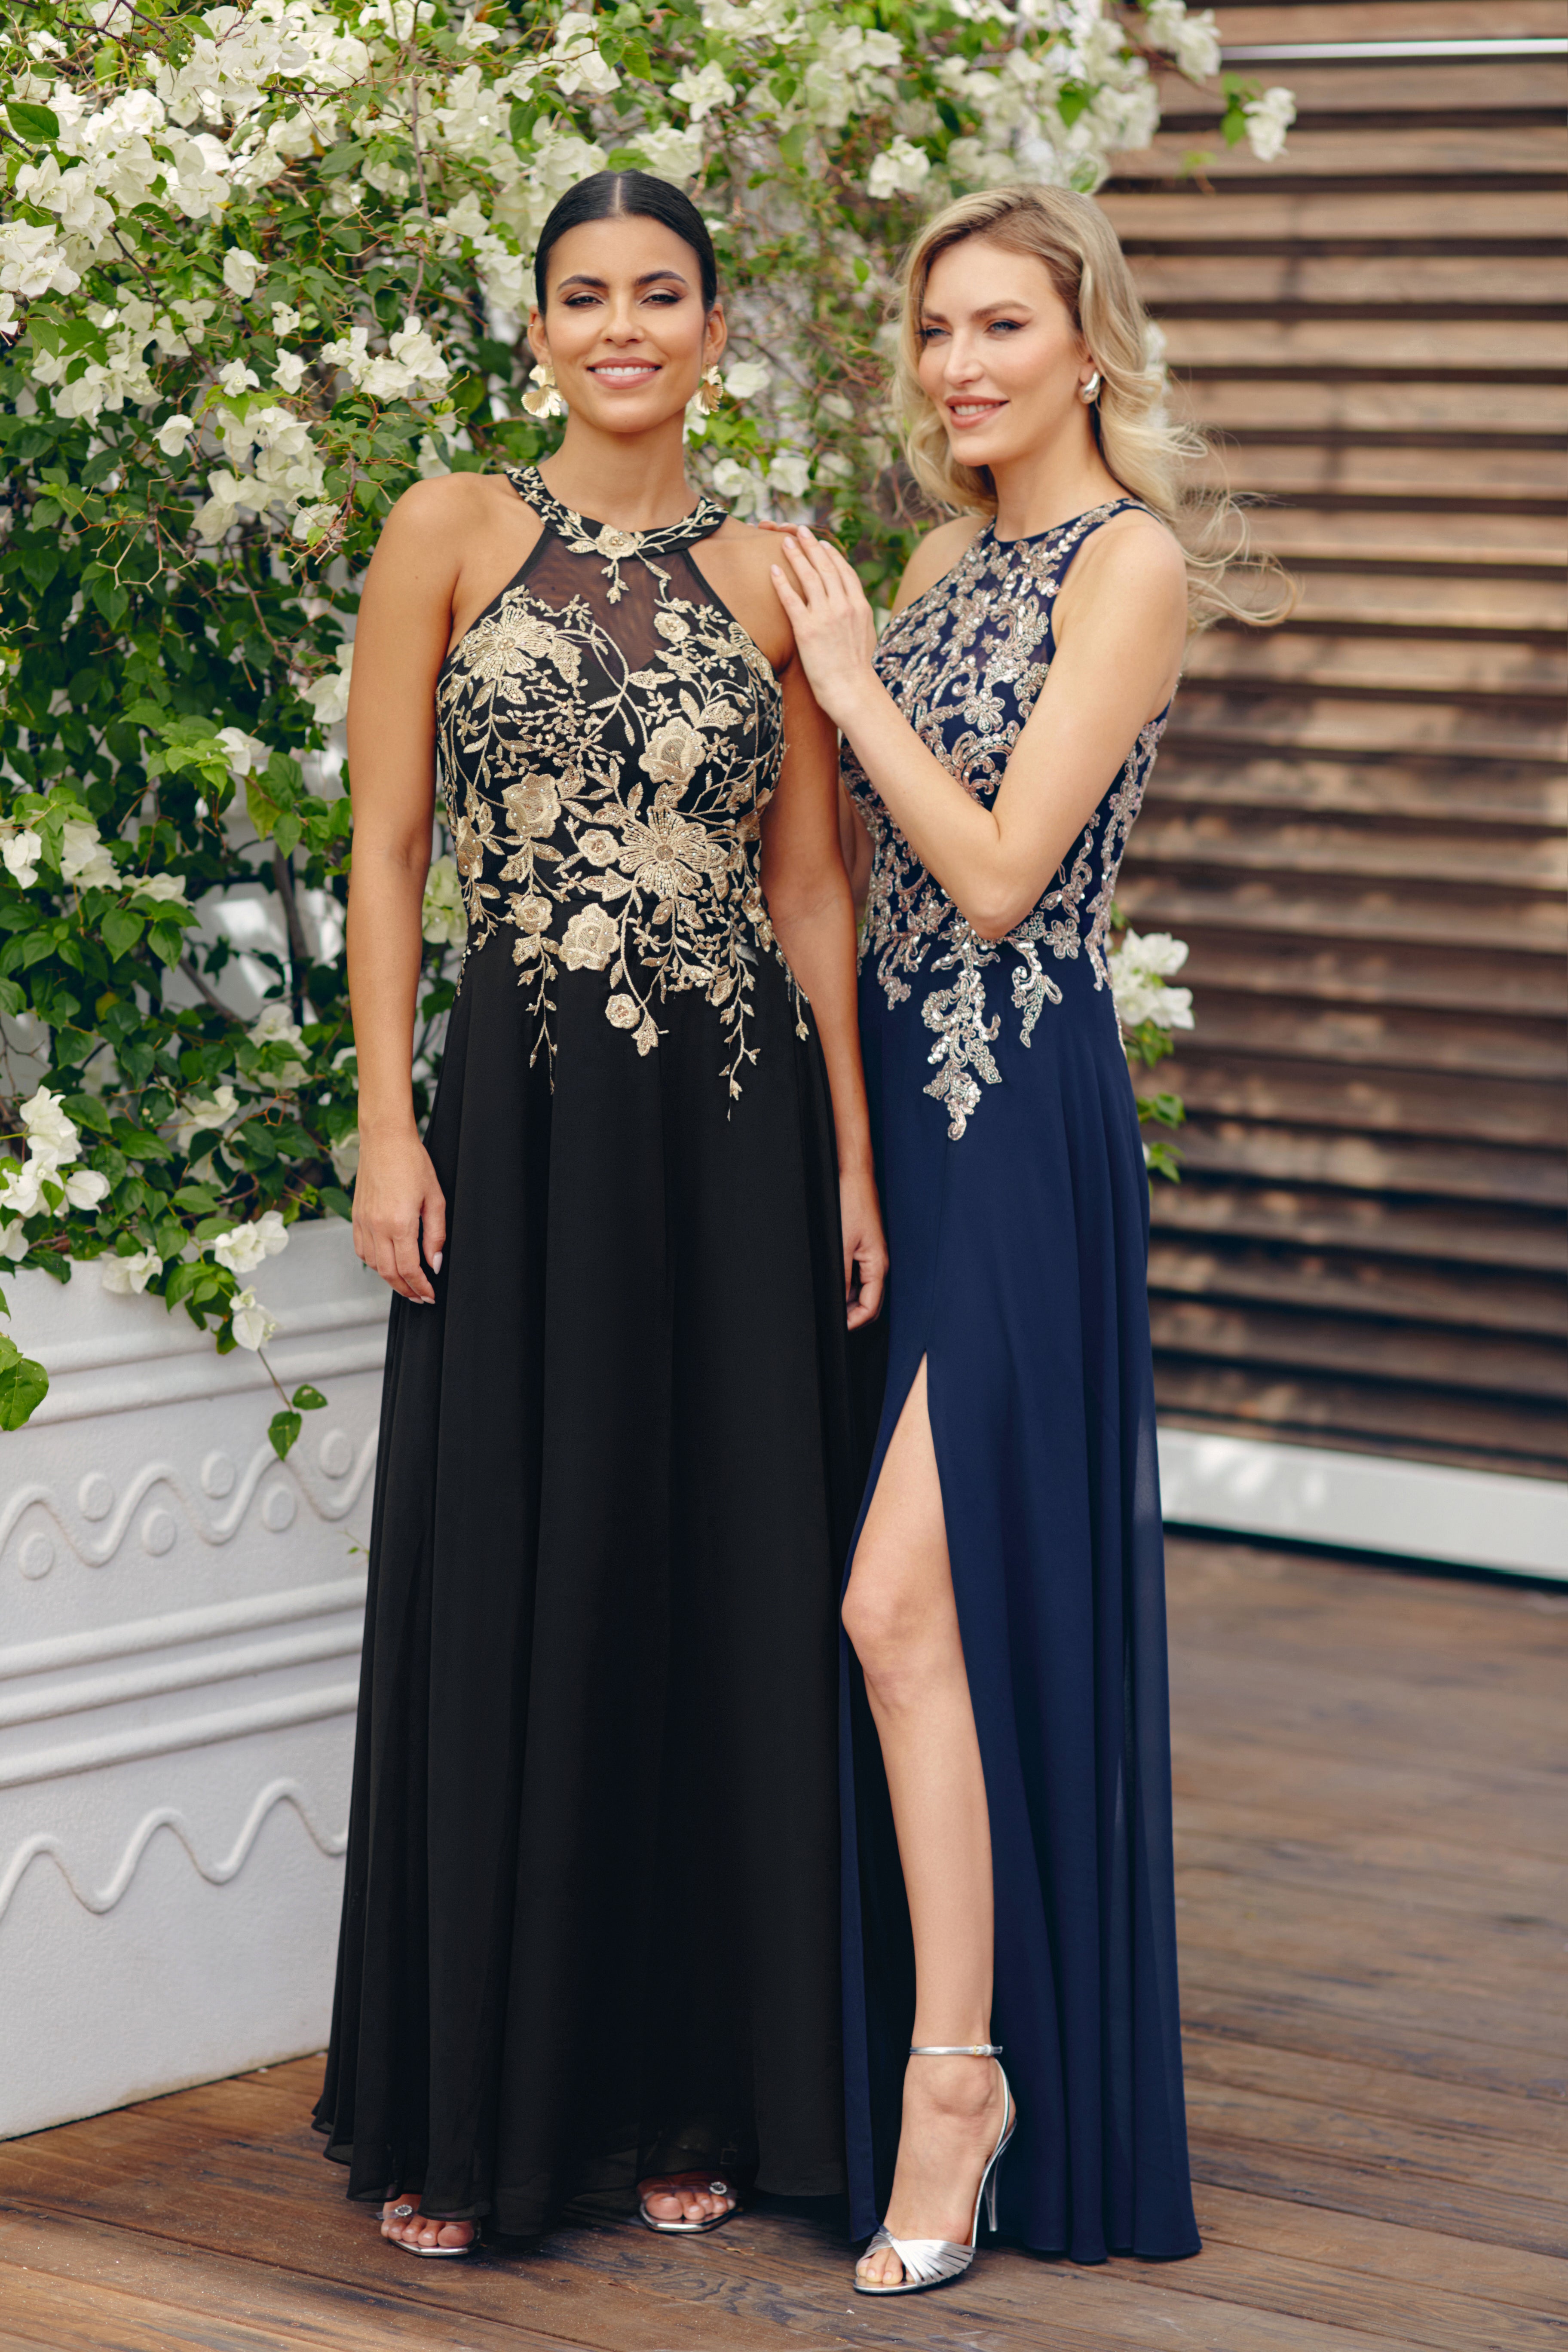 Special Occasion Party Wear, Cocktail Dresses, & Evening Gowns